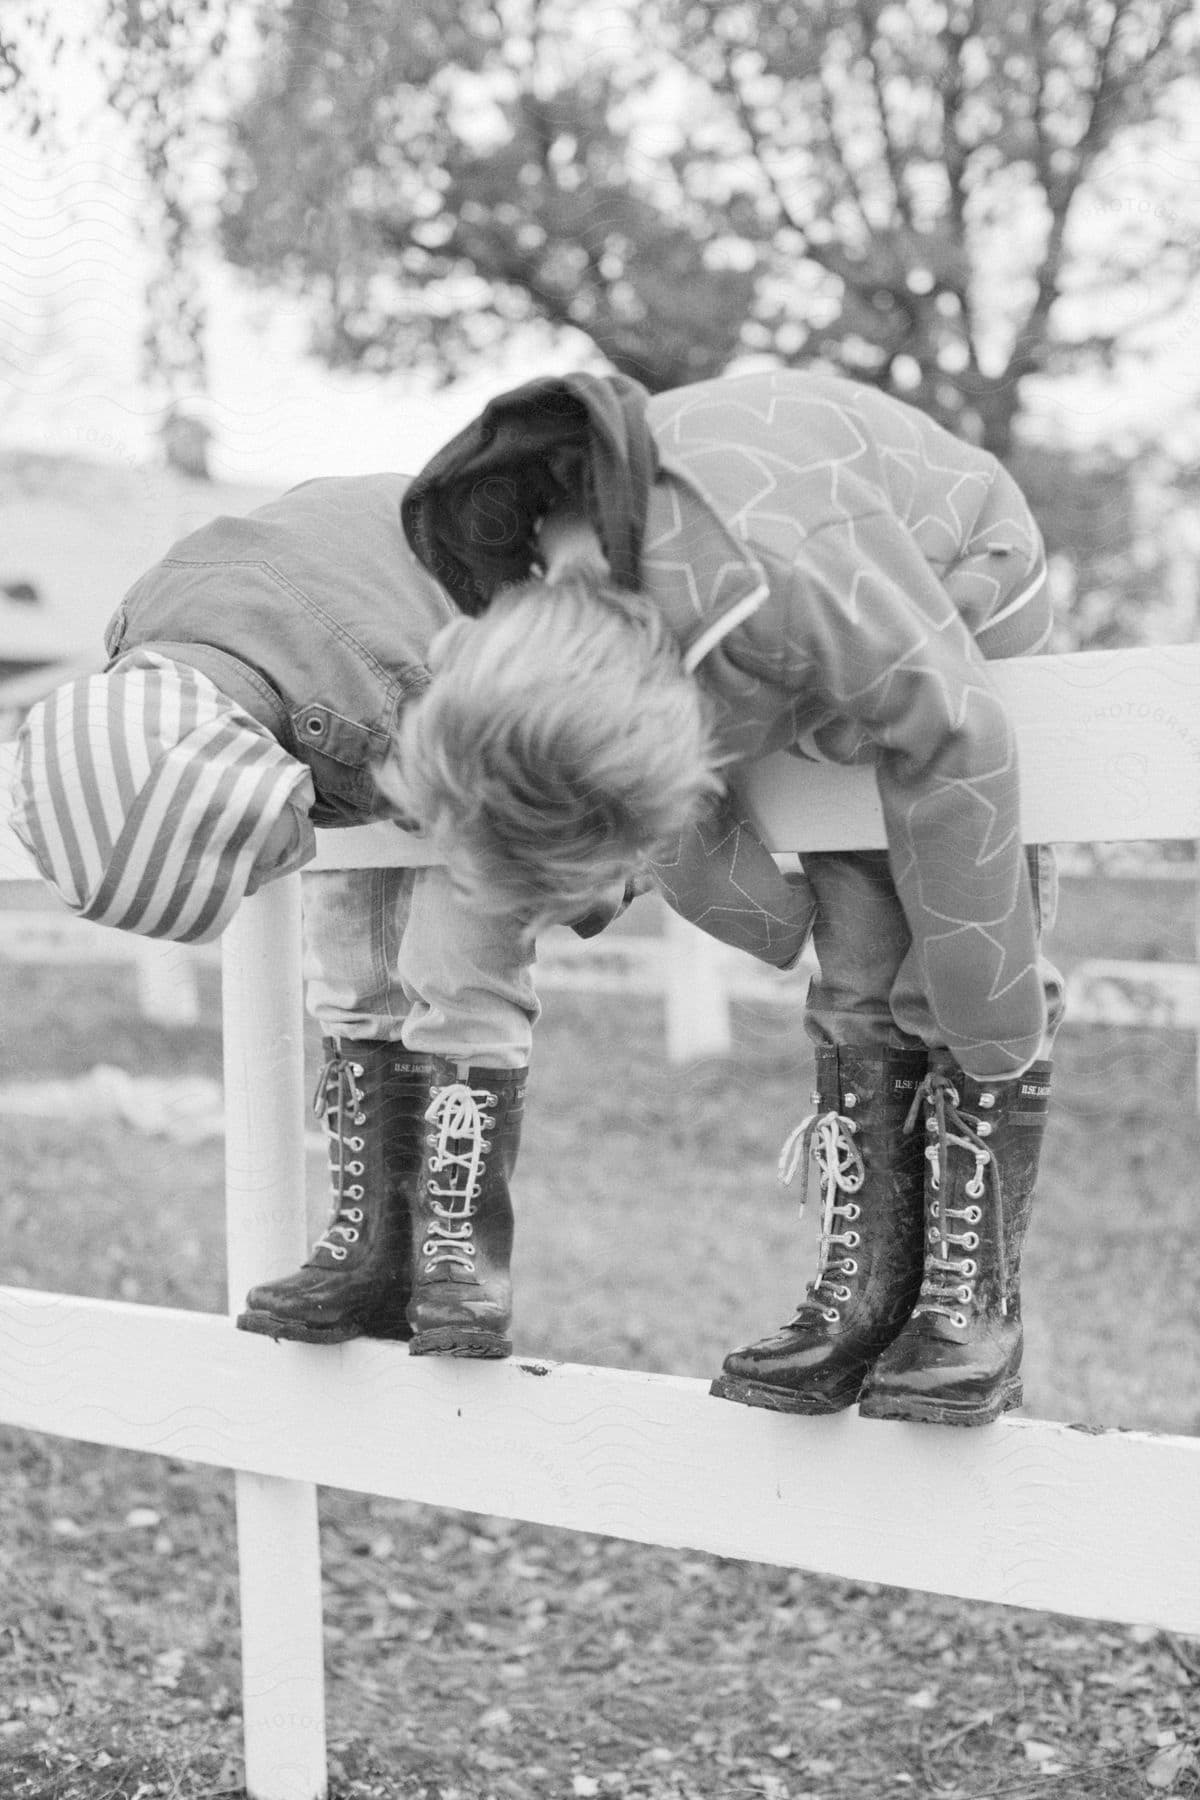 Two children in winter clothing lean over a fence they have climbed